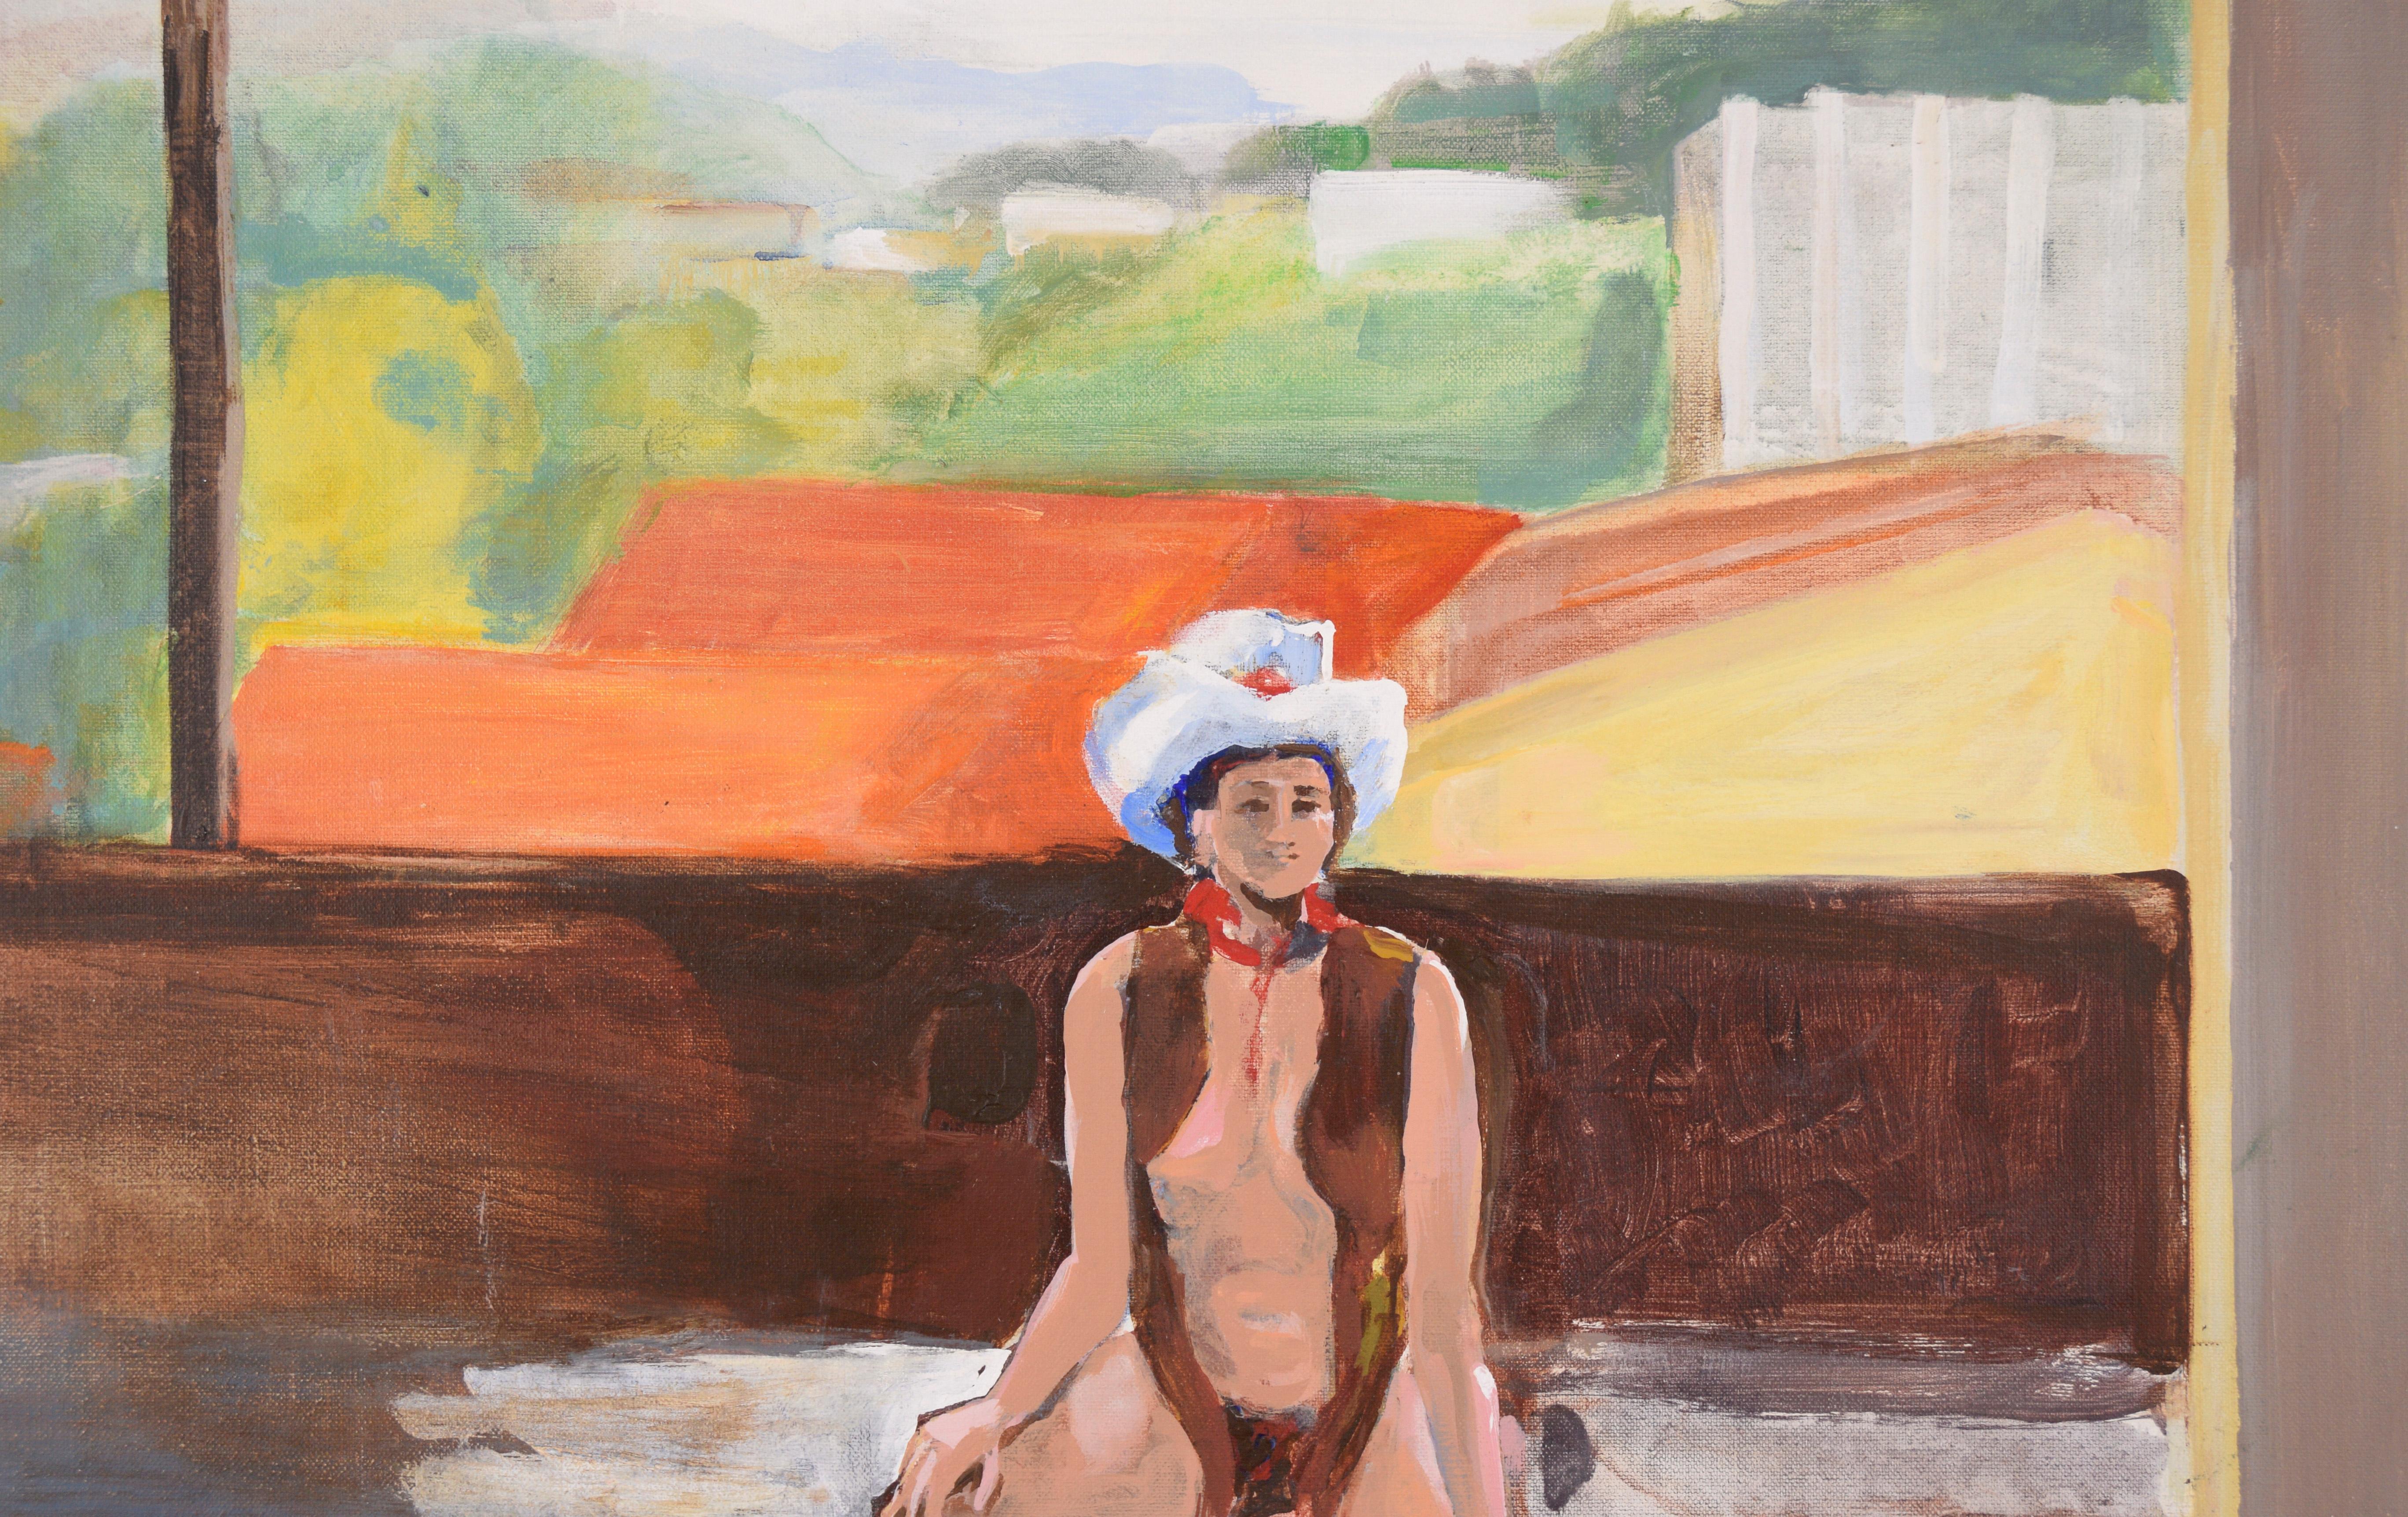 Cowgirl in the Studio - Figurative Study in Oil on Canvas

A woman in a vest, cowboy hat, and boots by American painter, Patricia Gren Hayes (b. 1932). The model is sitting on a stool in a large art studio, with a large window behind her. Outside,